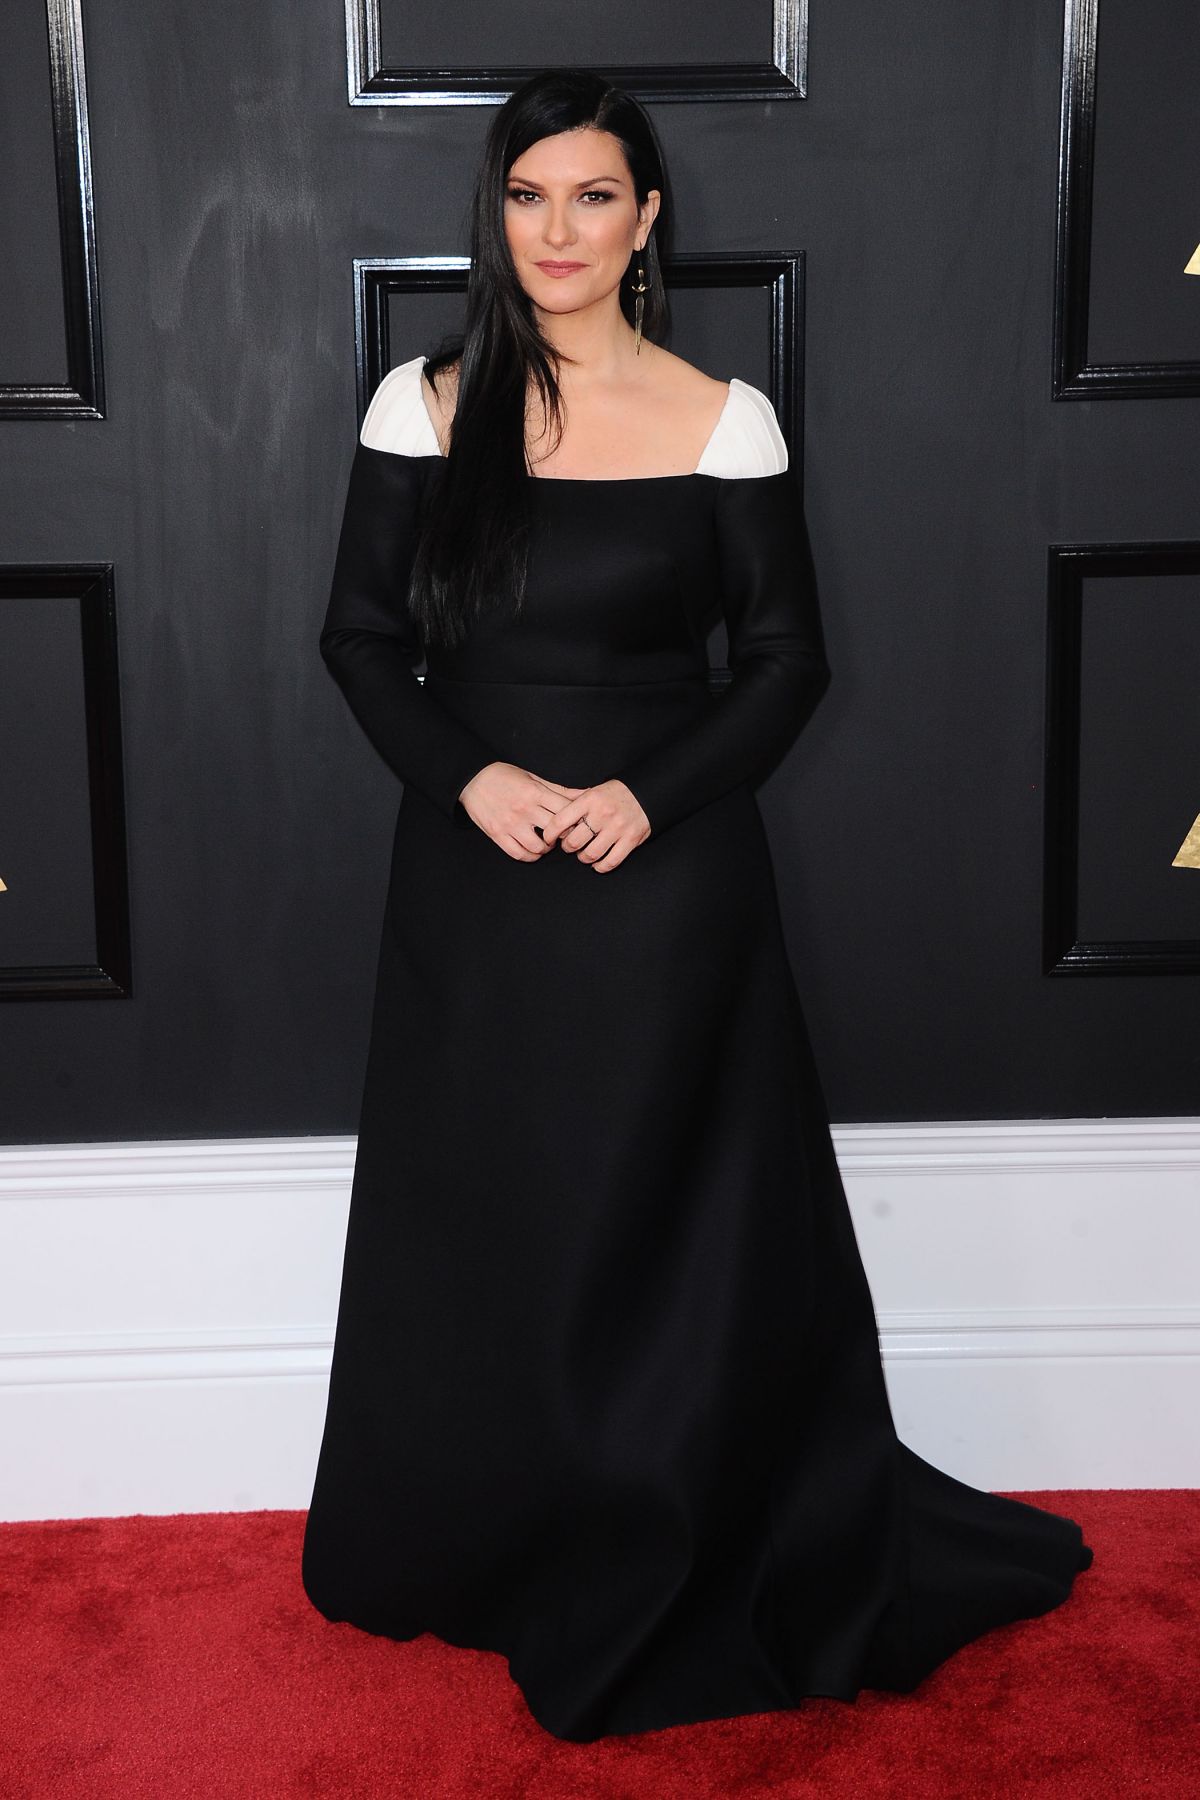 LAURA PAUSINI at 59th Annual Grammy Awards in Los Angeles 02/12/2017